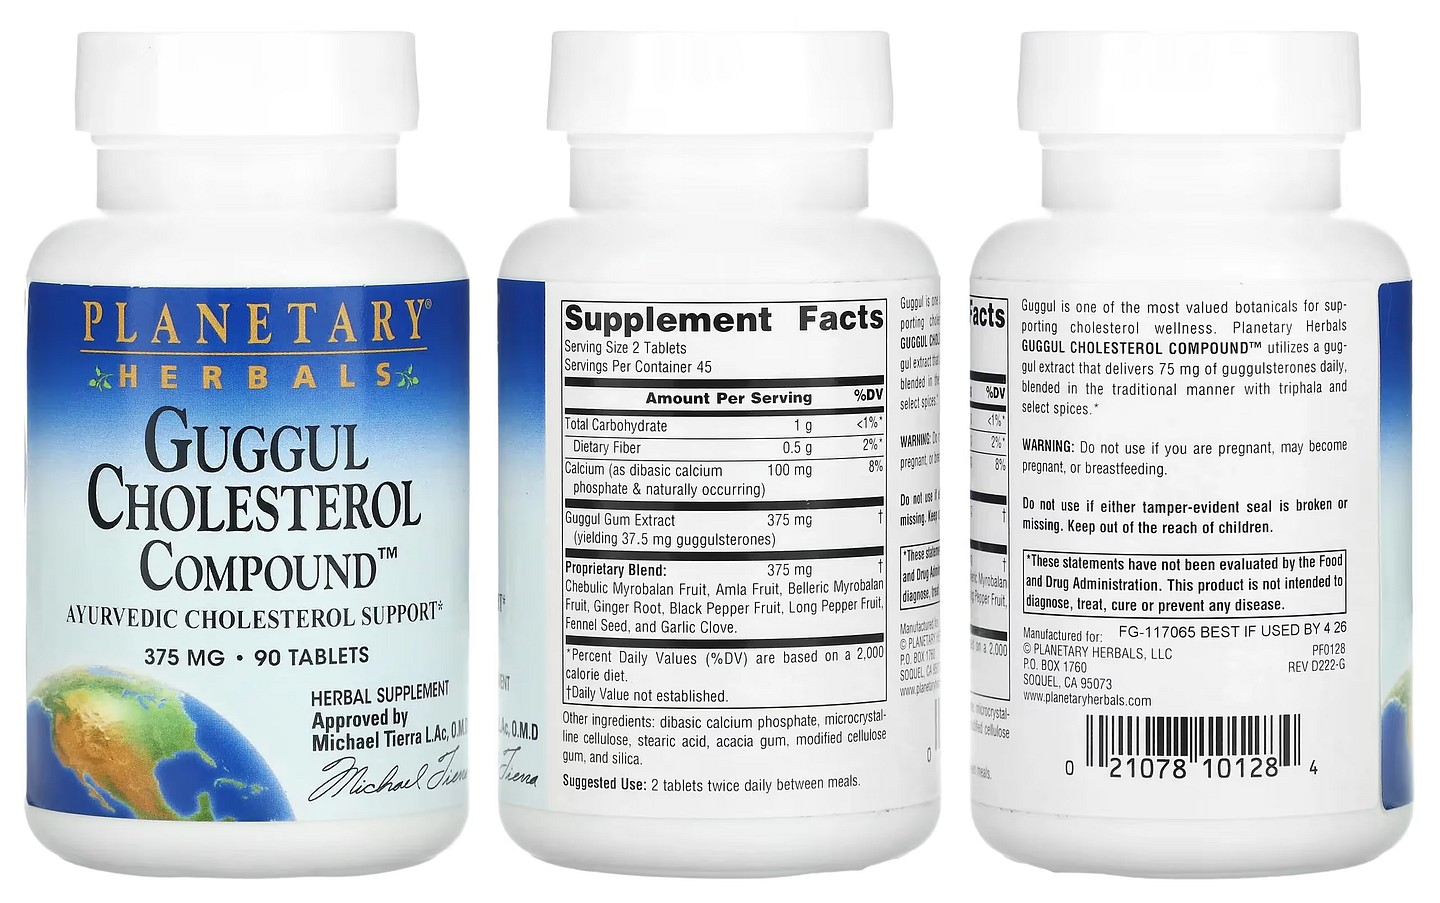 Planetary Herbals, Guggul Cholesterol Compound packaging